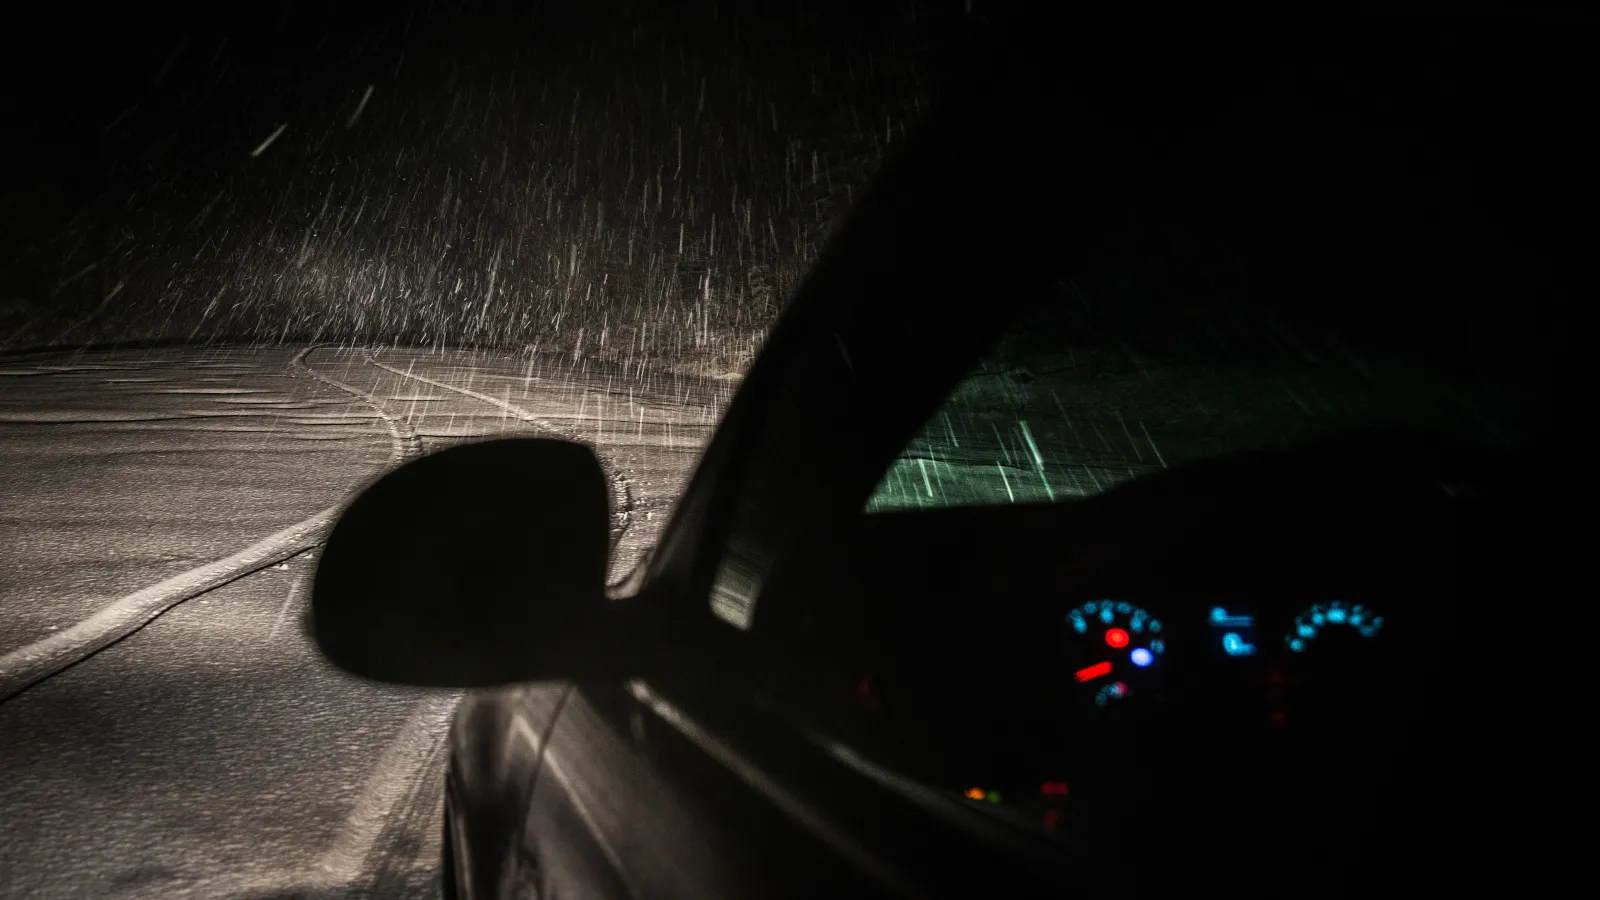 Do you avoid driving at night because your car's headlights are